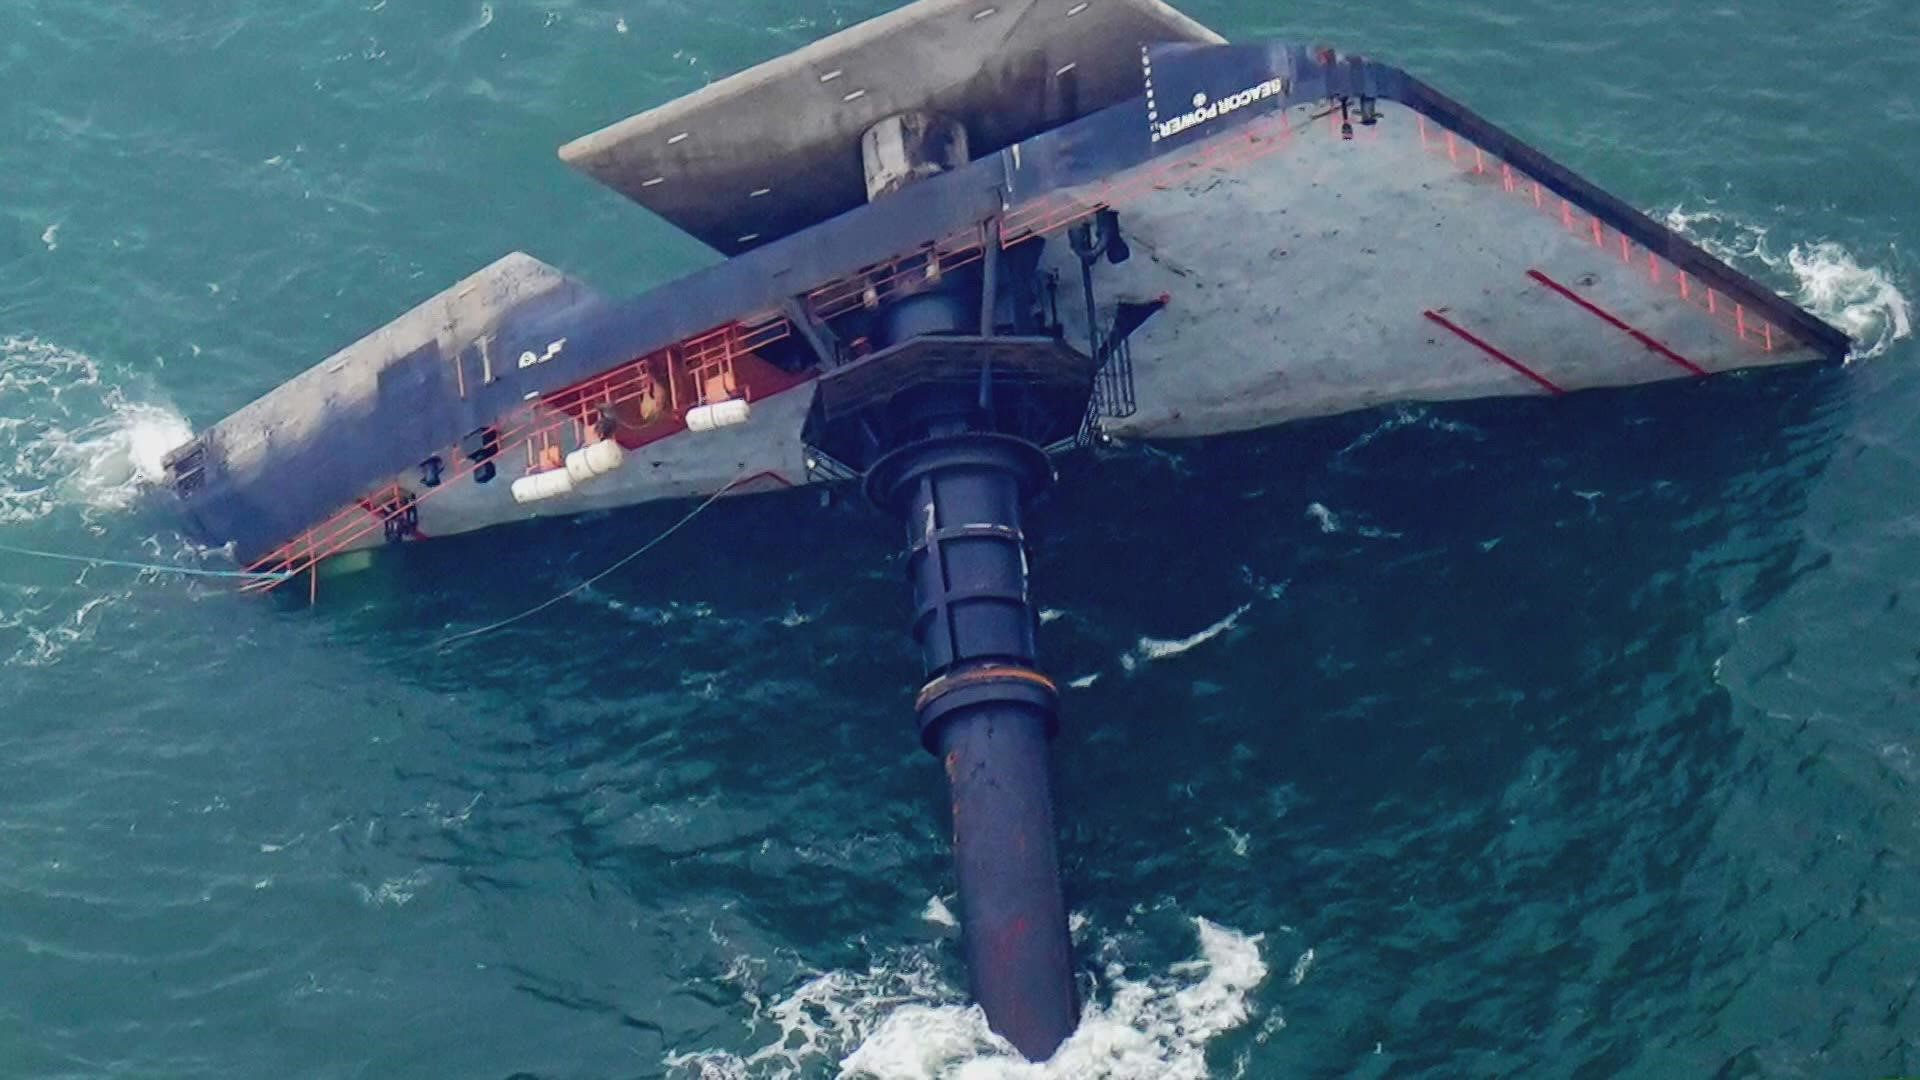 The National Transportation and Safety Board released their 18-month investigation into the capsizing of the Seacor power.